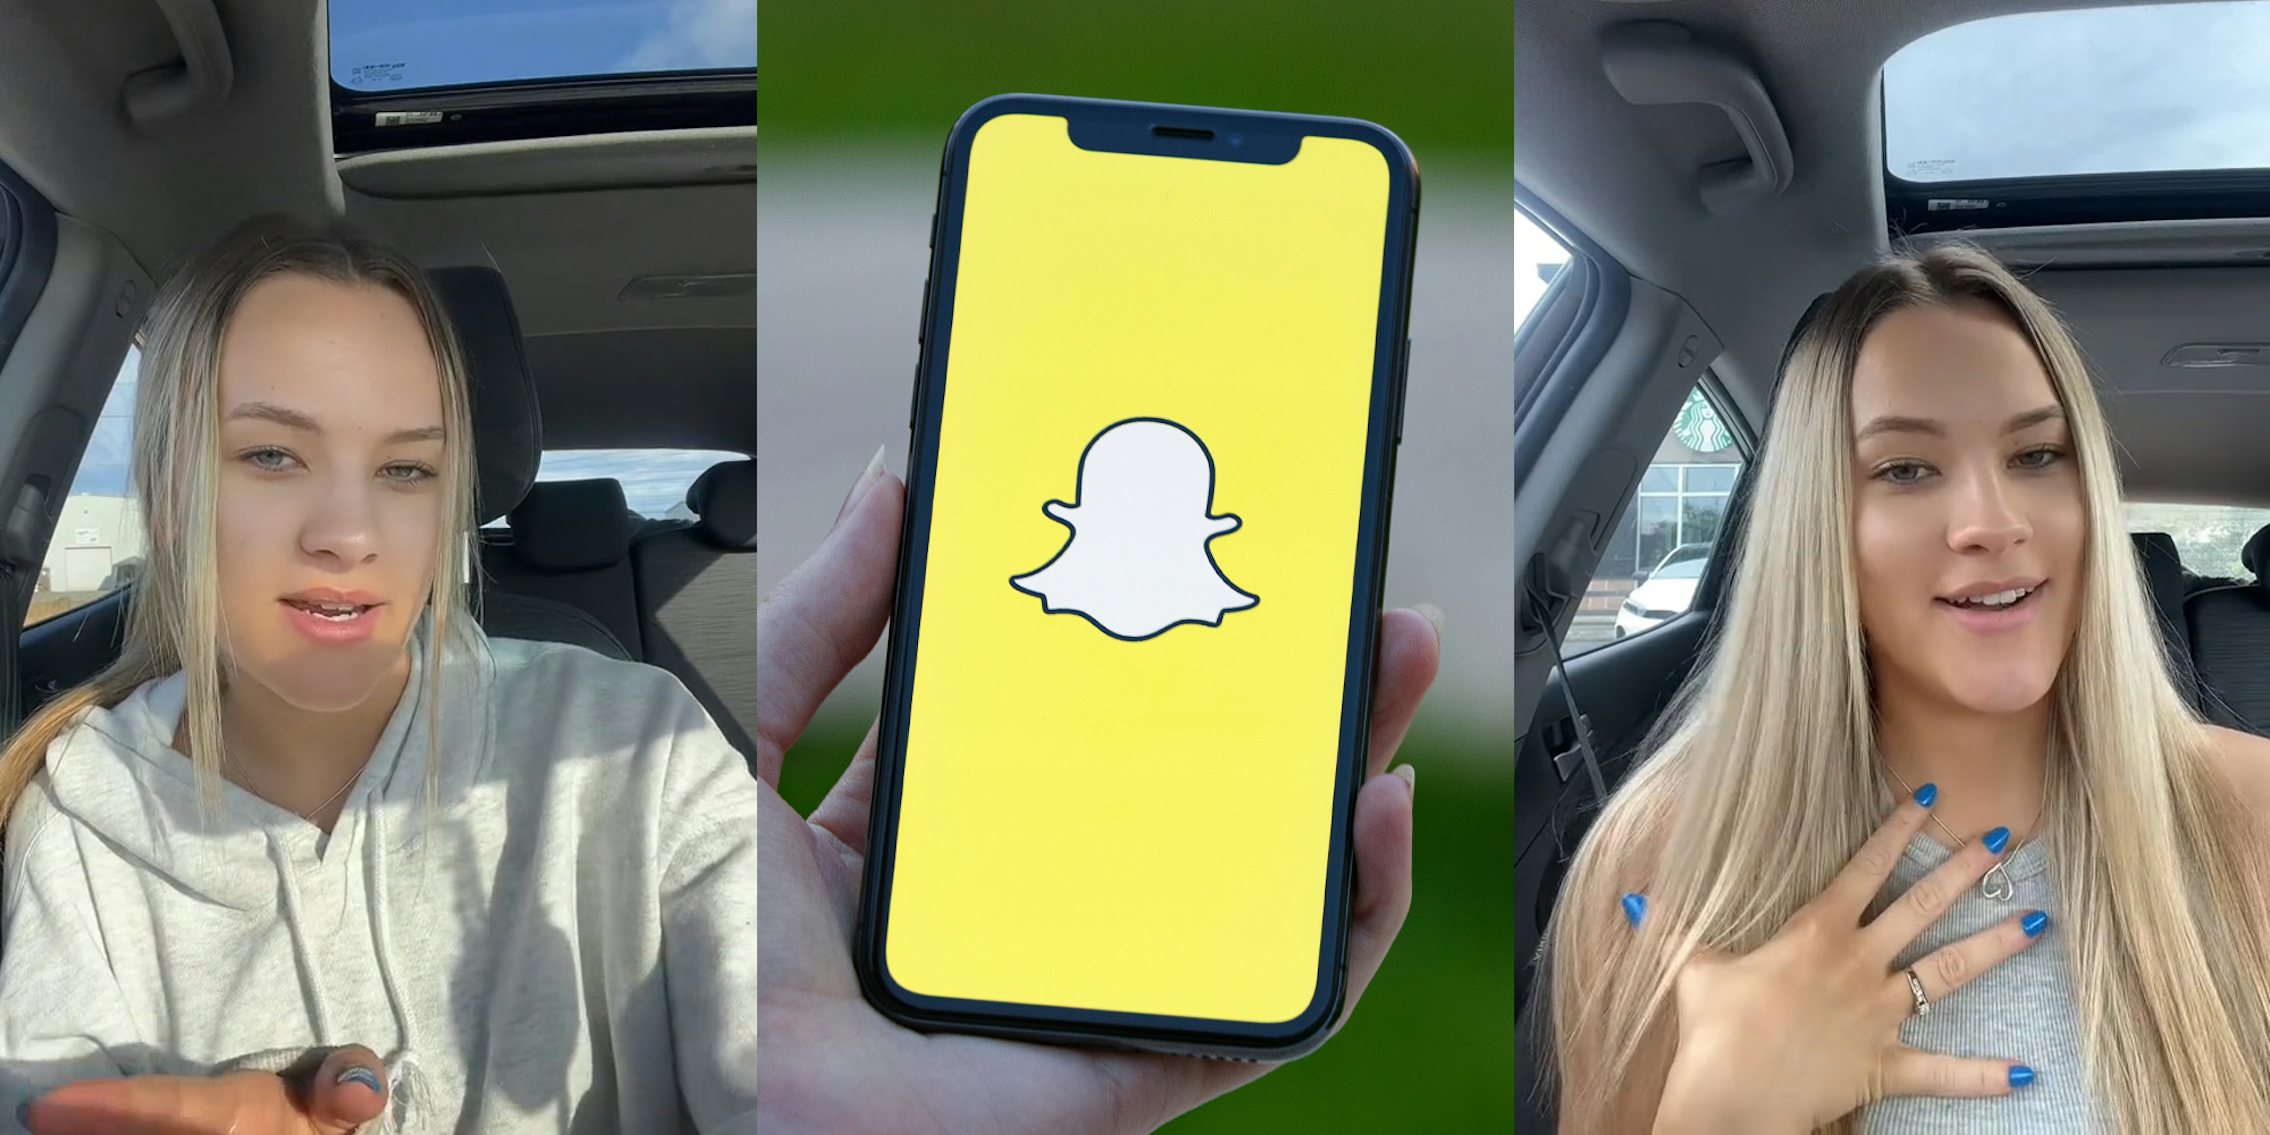 woman speaking in car (l) hand holding phone with Snapchat on screen (c) woman speaking in car (r)